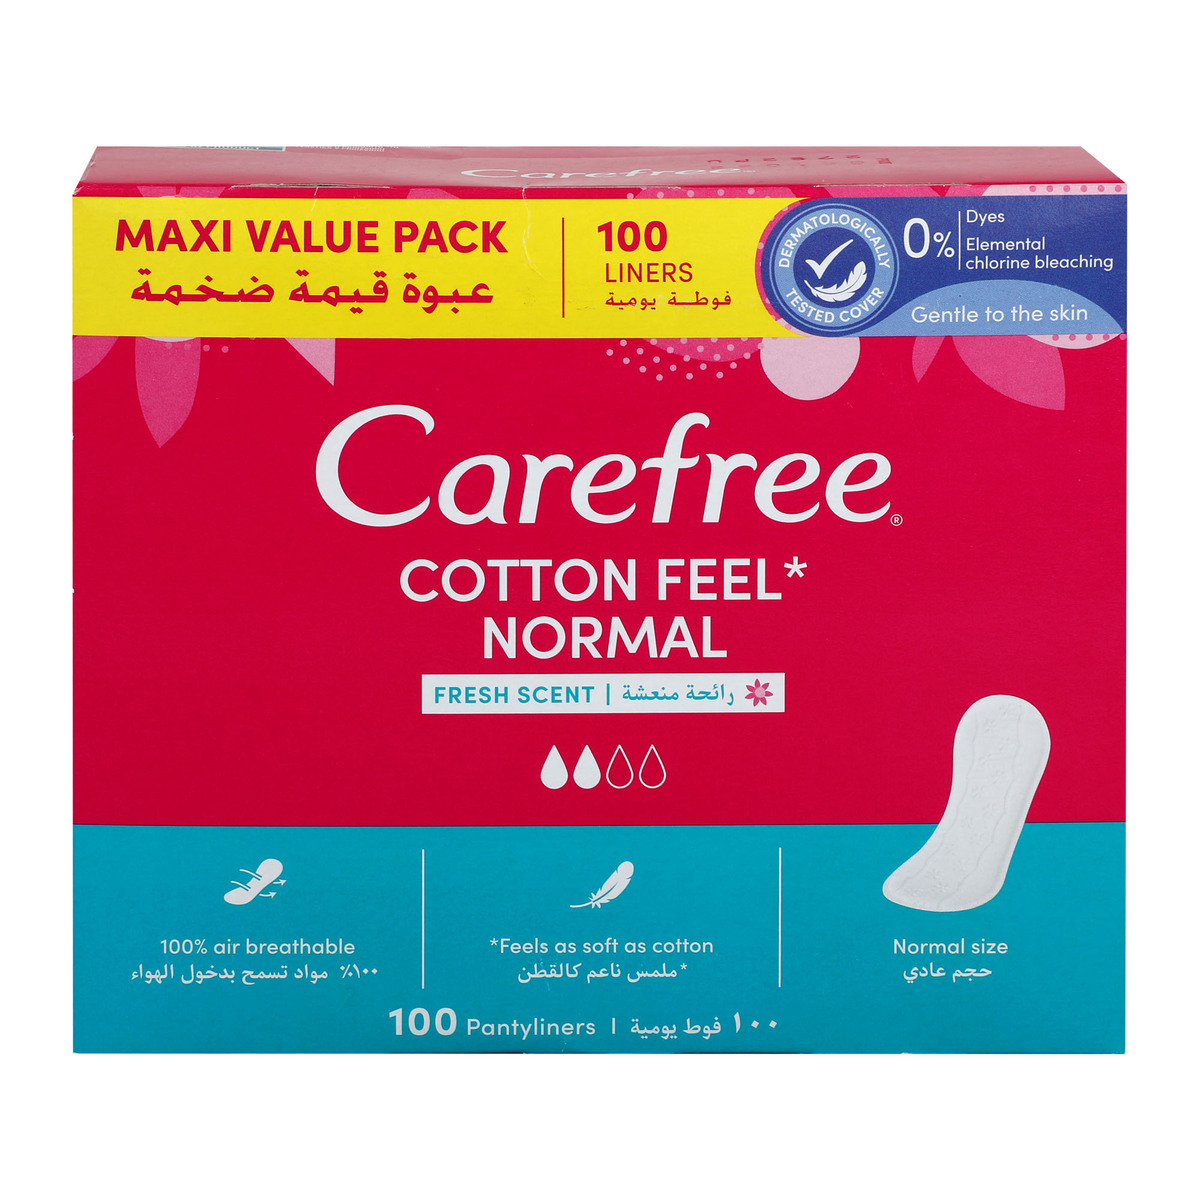 Carefree Cotton Feel With Fresh Scent Pantyliner 100 pcs